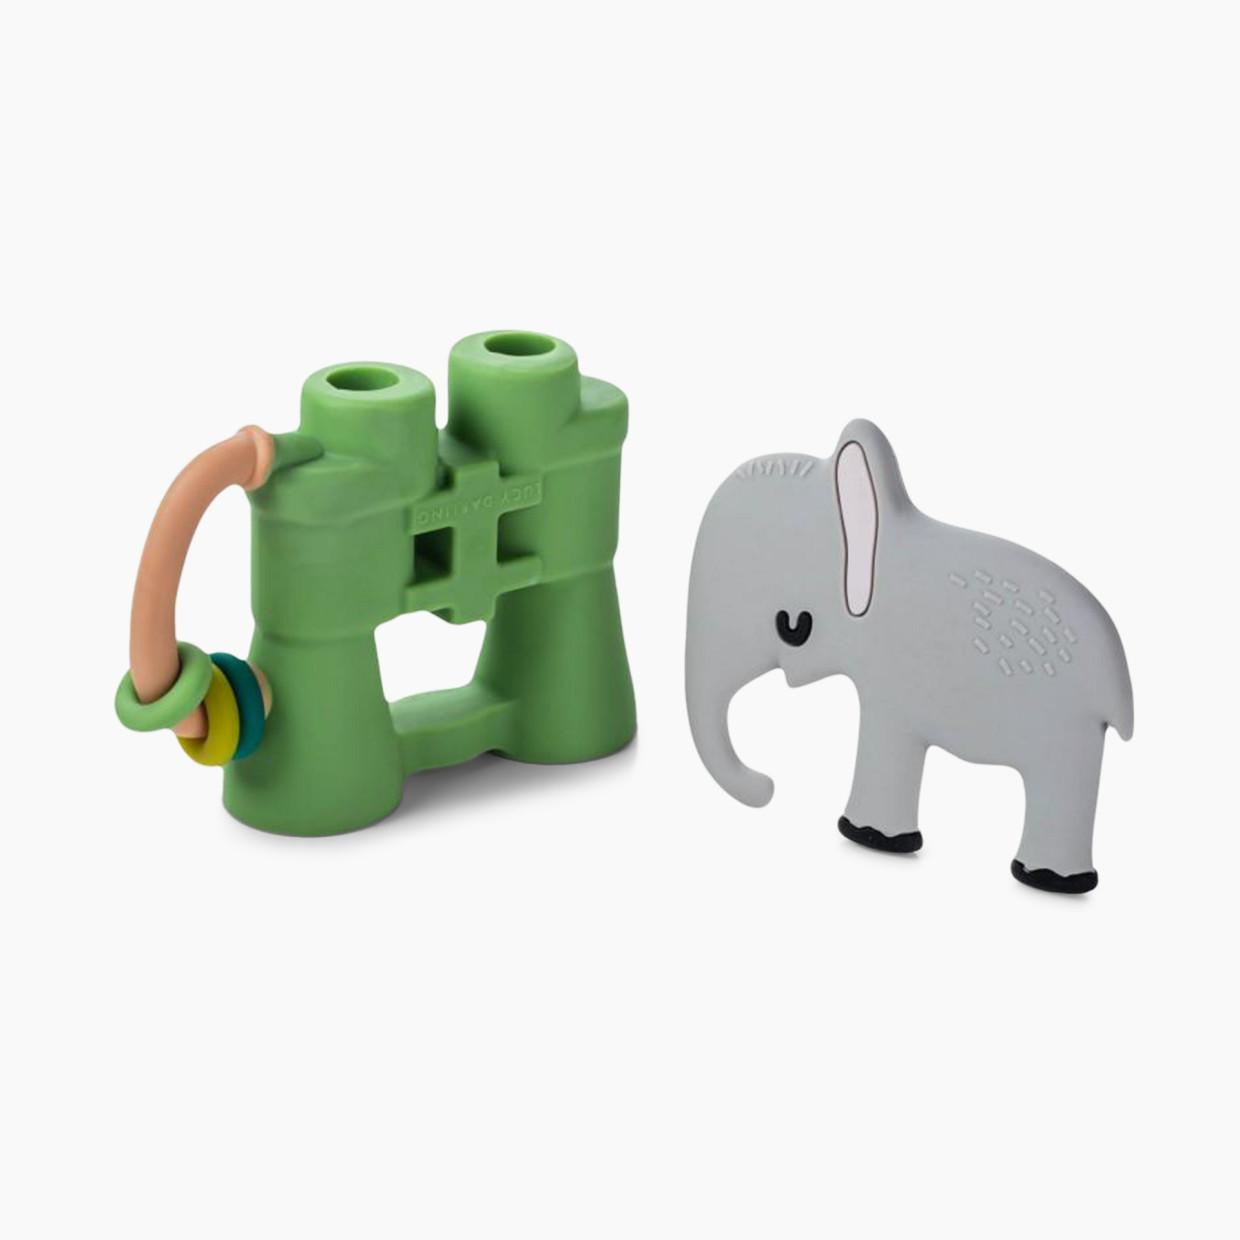 Lucy Darling Baby Teether Sensory Toy - Animal Lover.